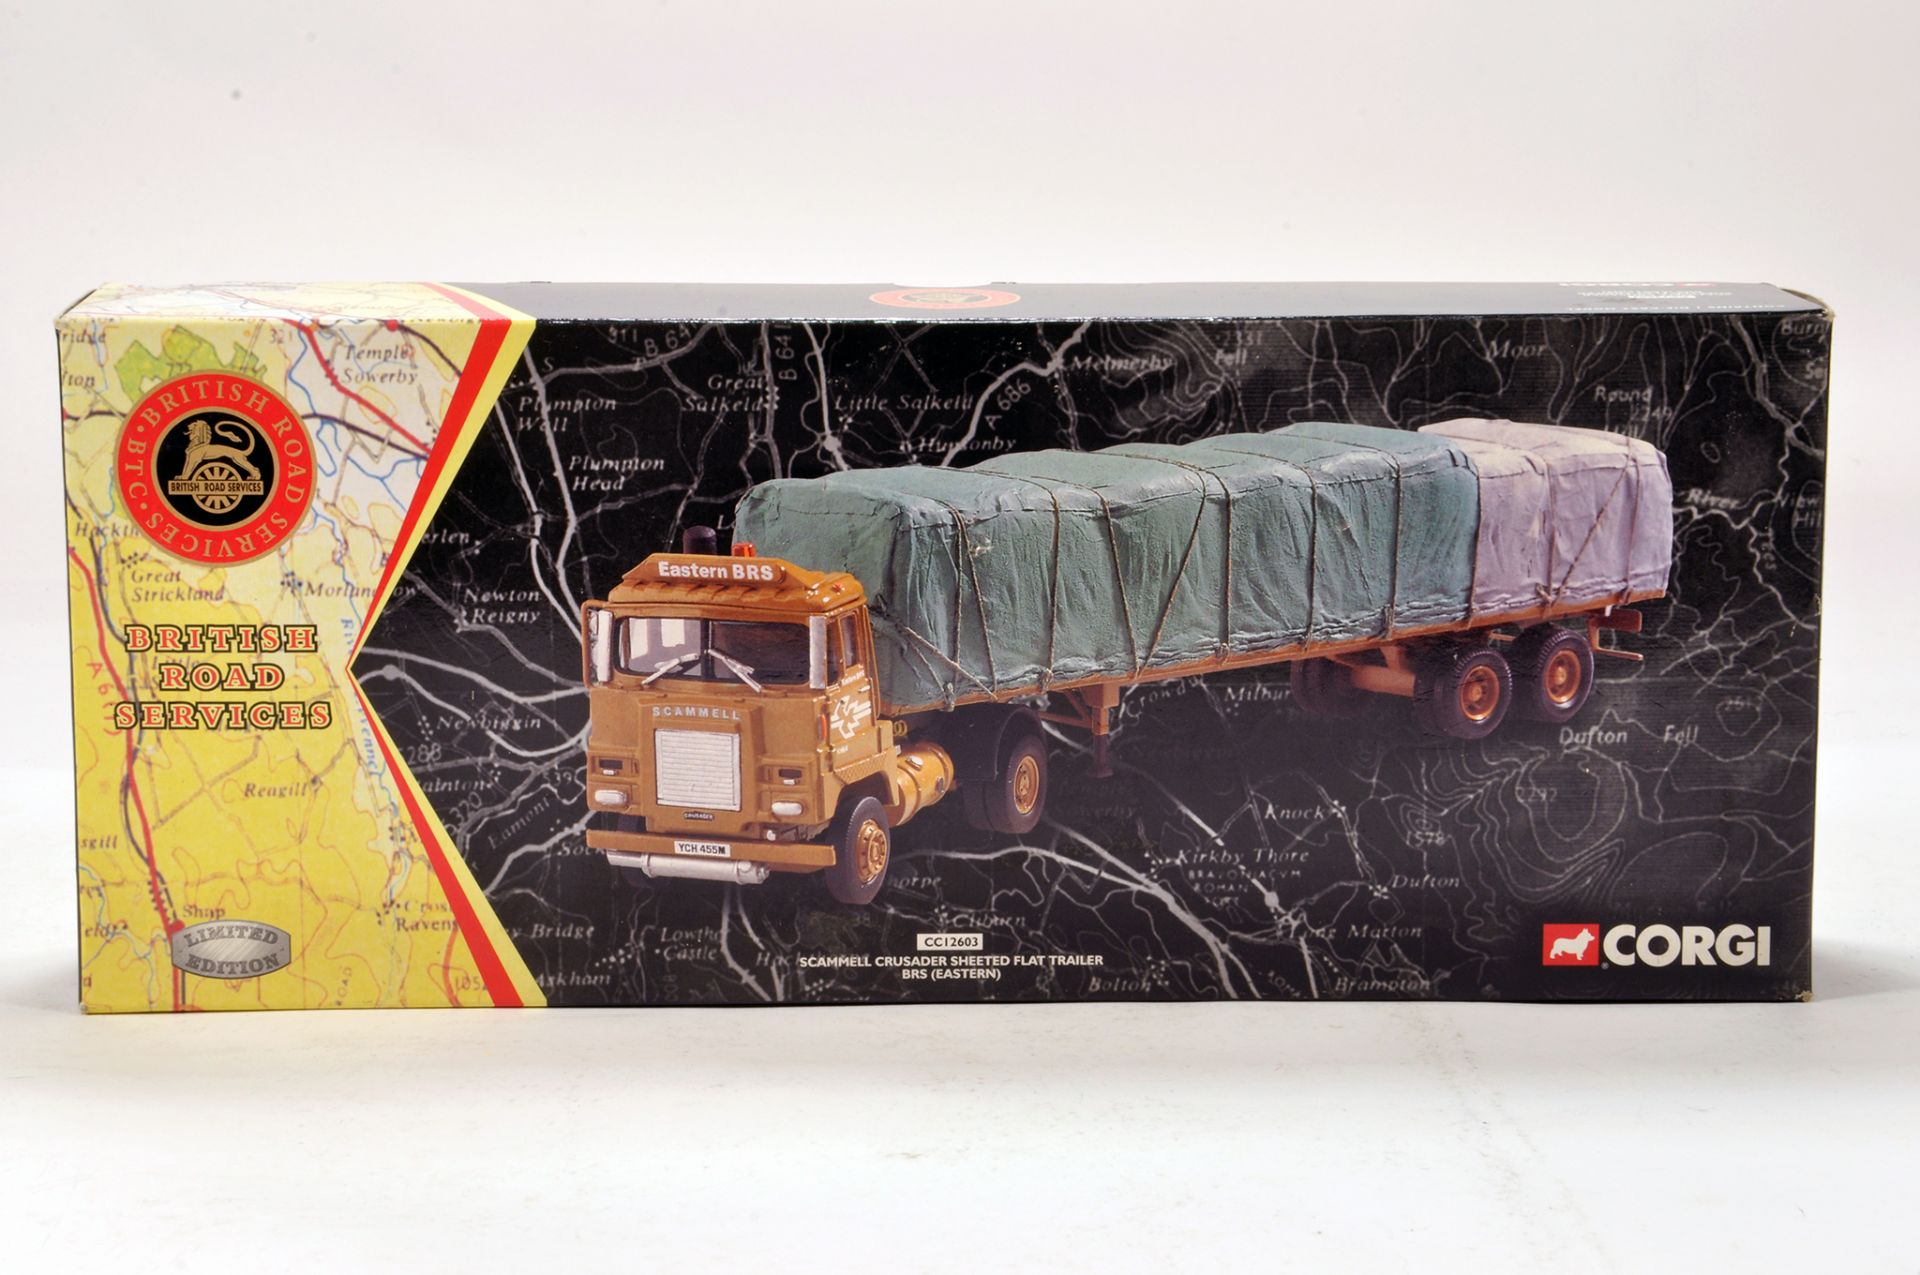 Corgi 1/50 diecast truck issue comprising No. CC12603 Scammell Crusader Sheeted Trailer in livery of